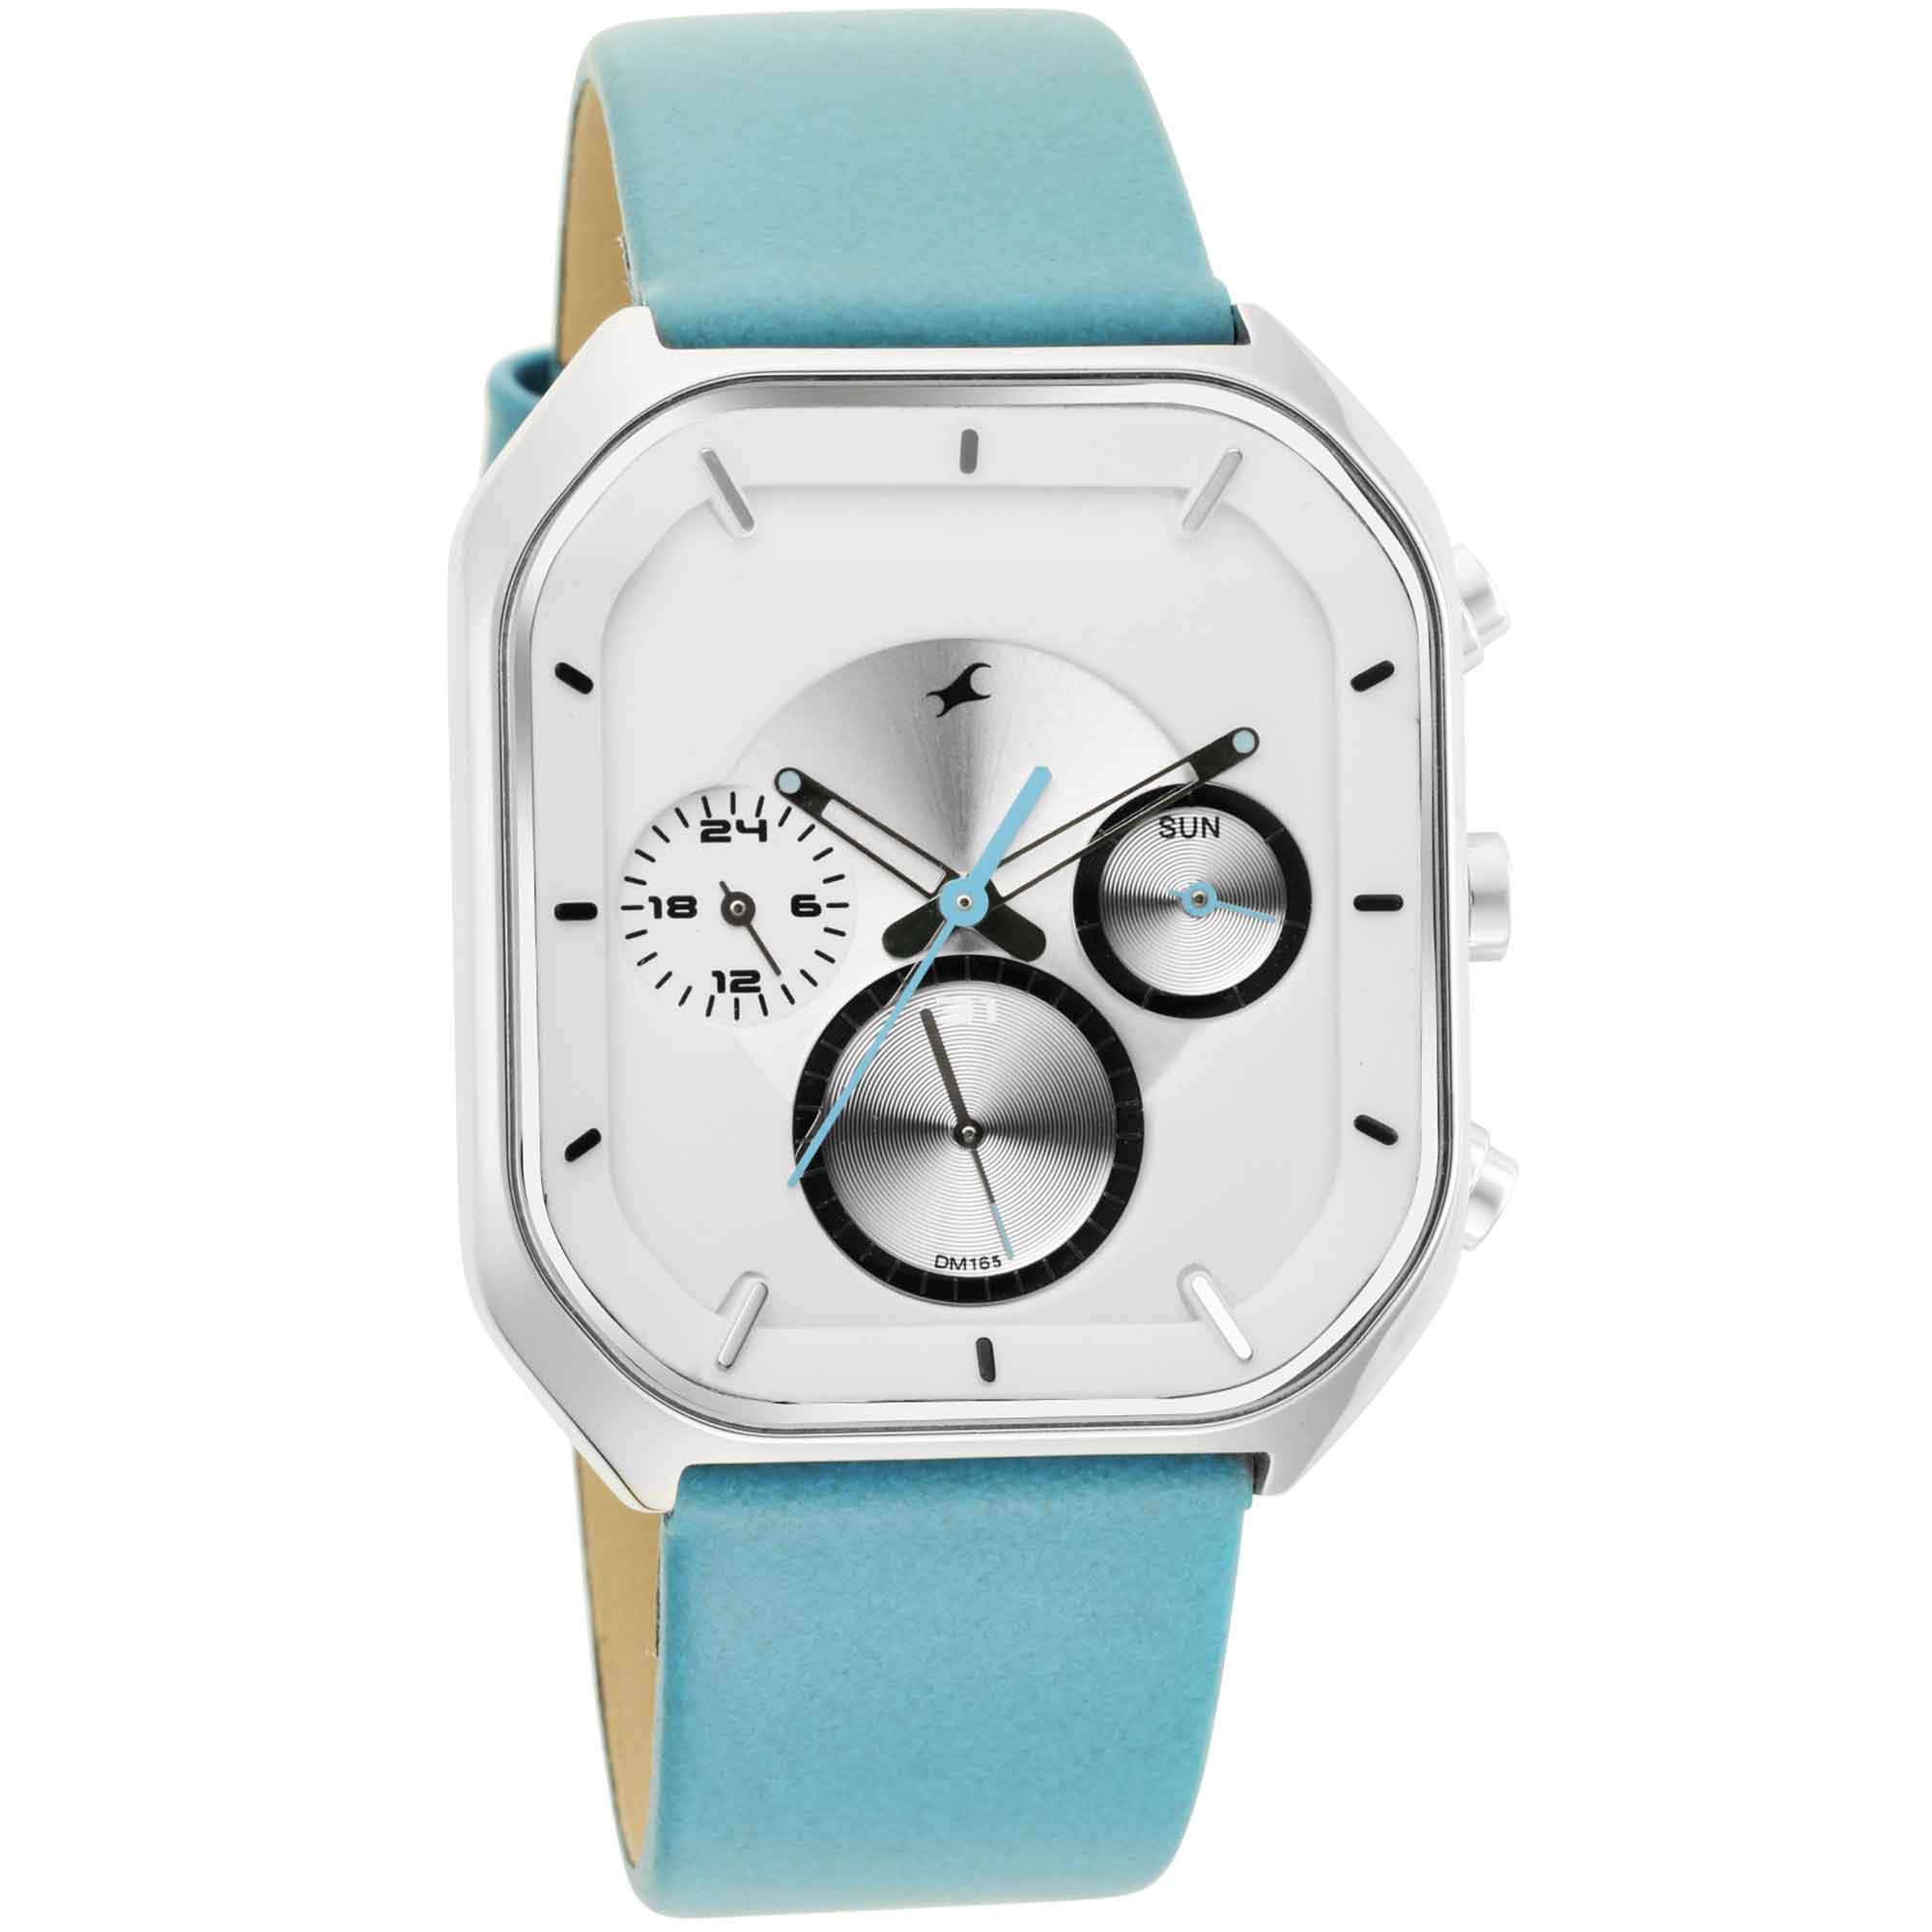 Fastrack After Dark Quartz Analog with Date White Dial Leather Strap Watch for Guys